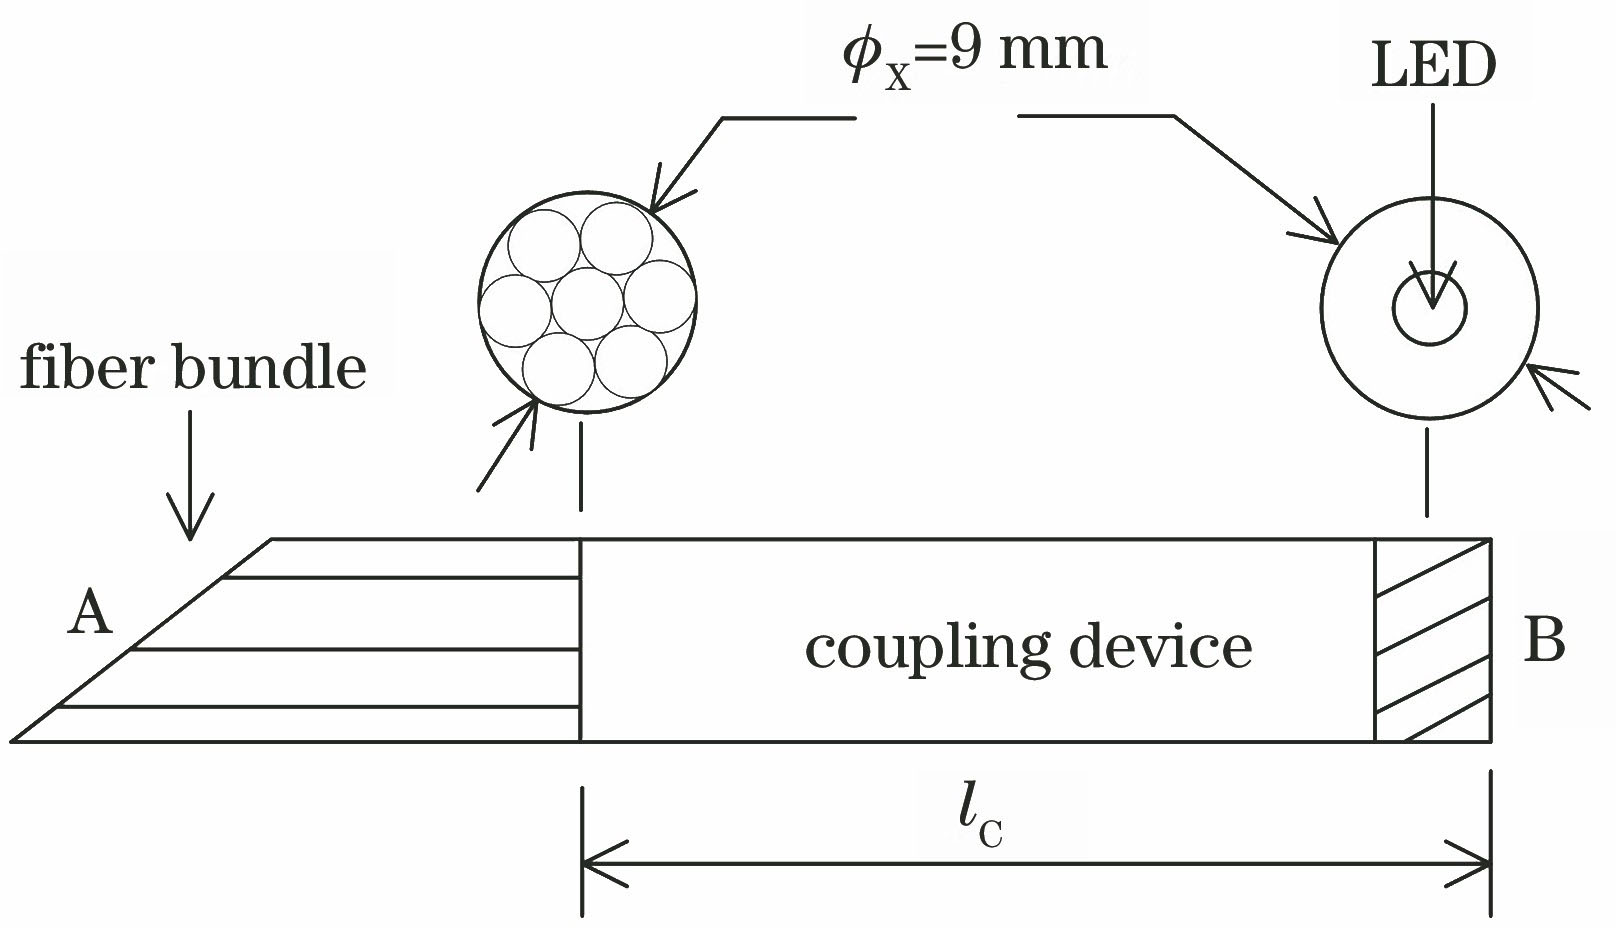 Schematic of the coupling device